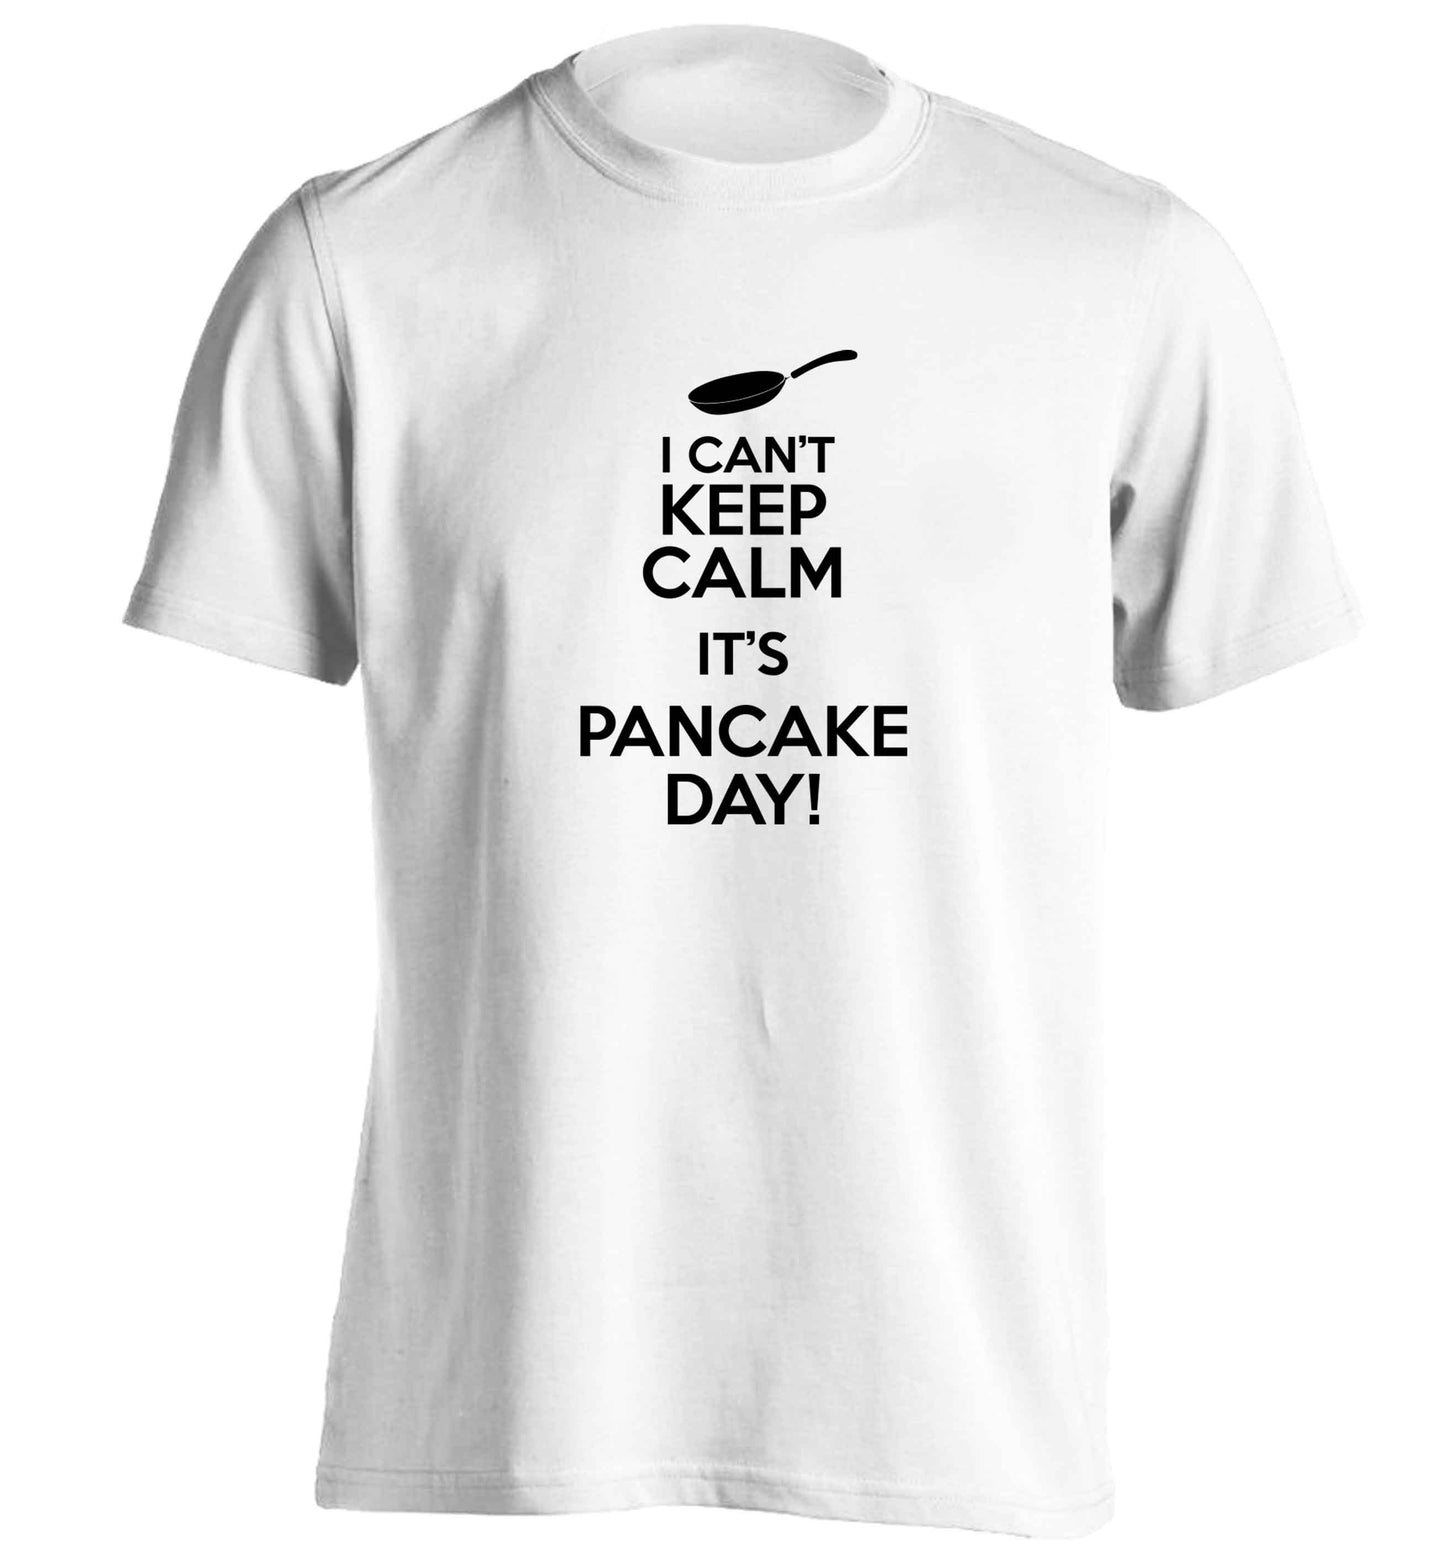 I can't keep calm it's pancake day! adults unisex white Tshirt 2XL